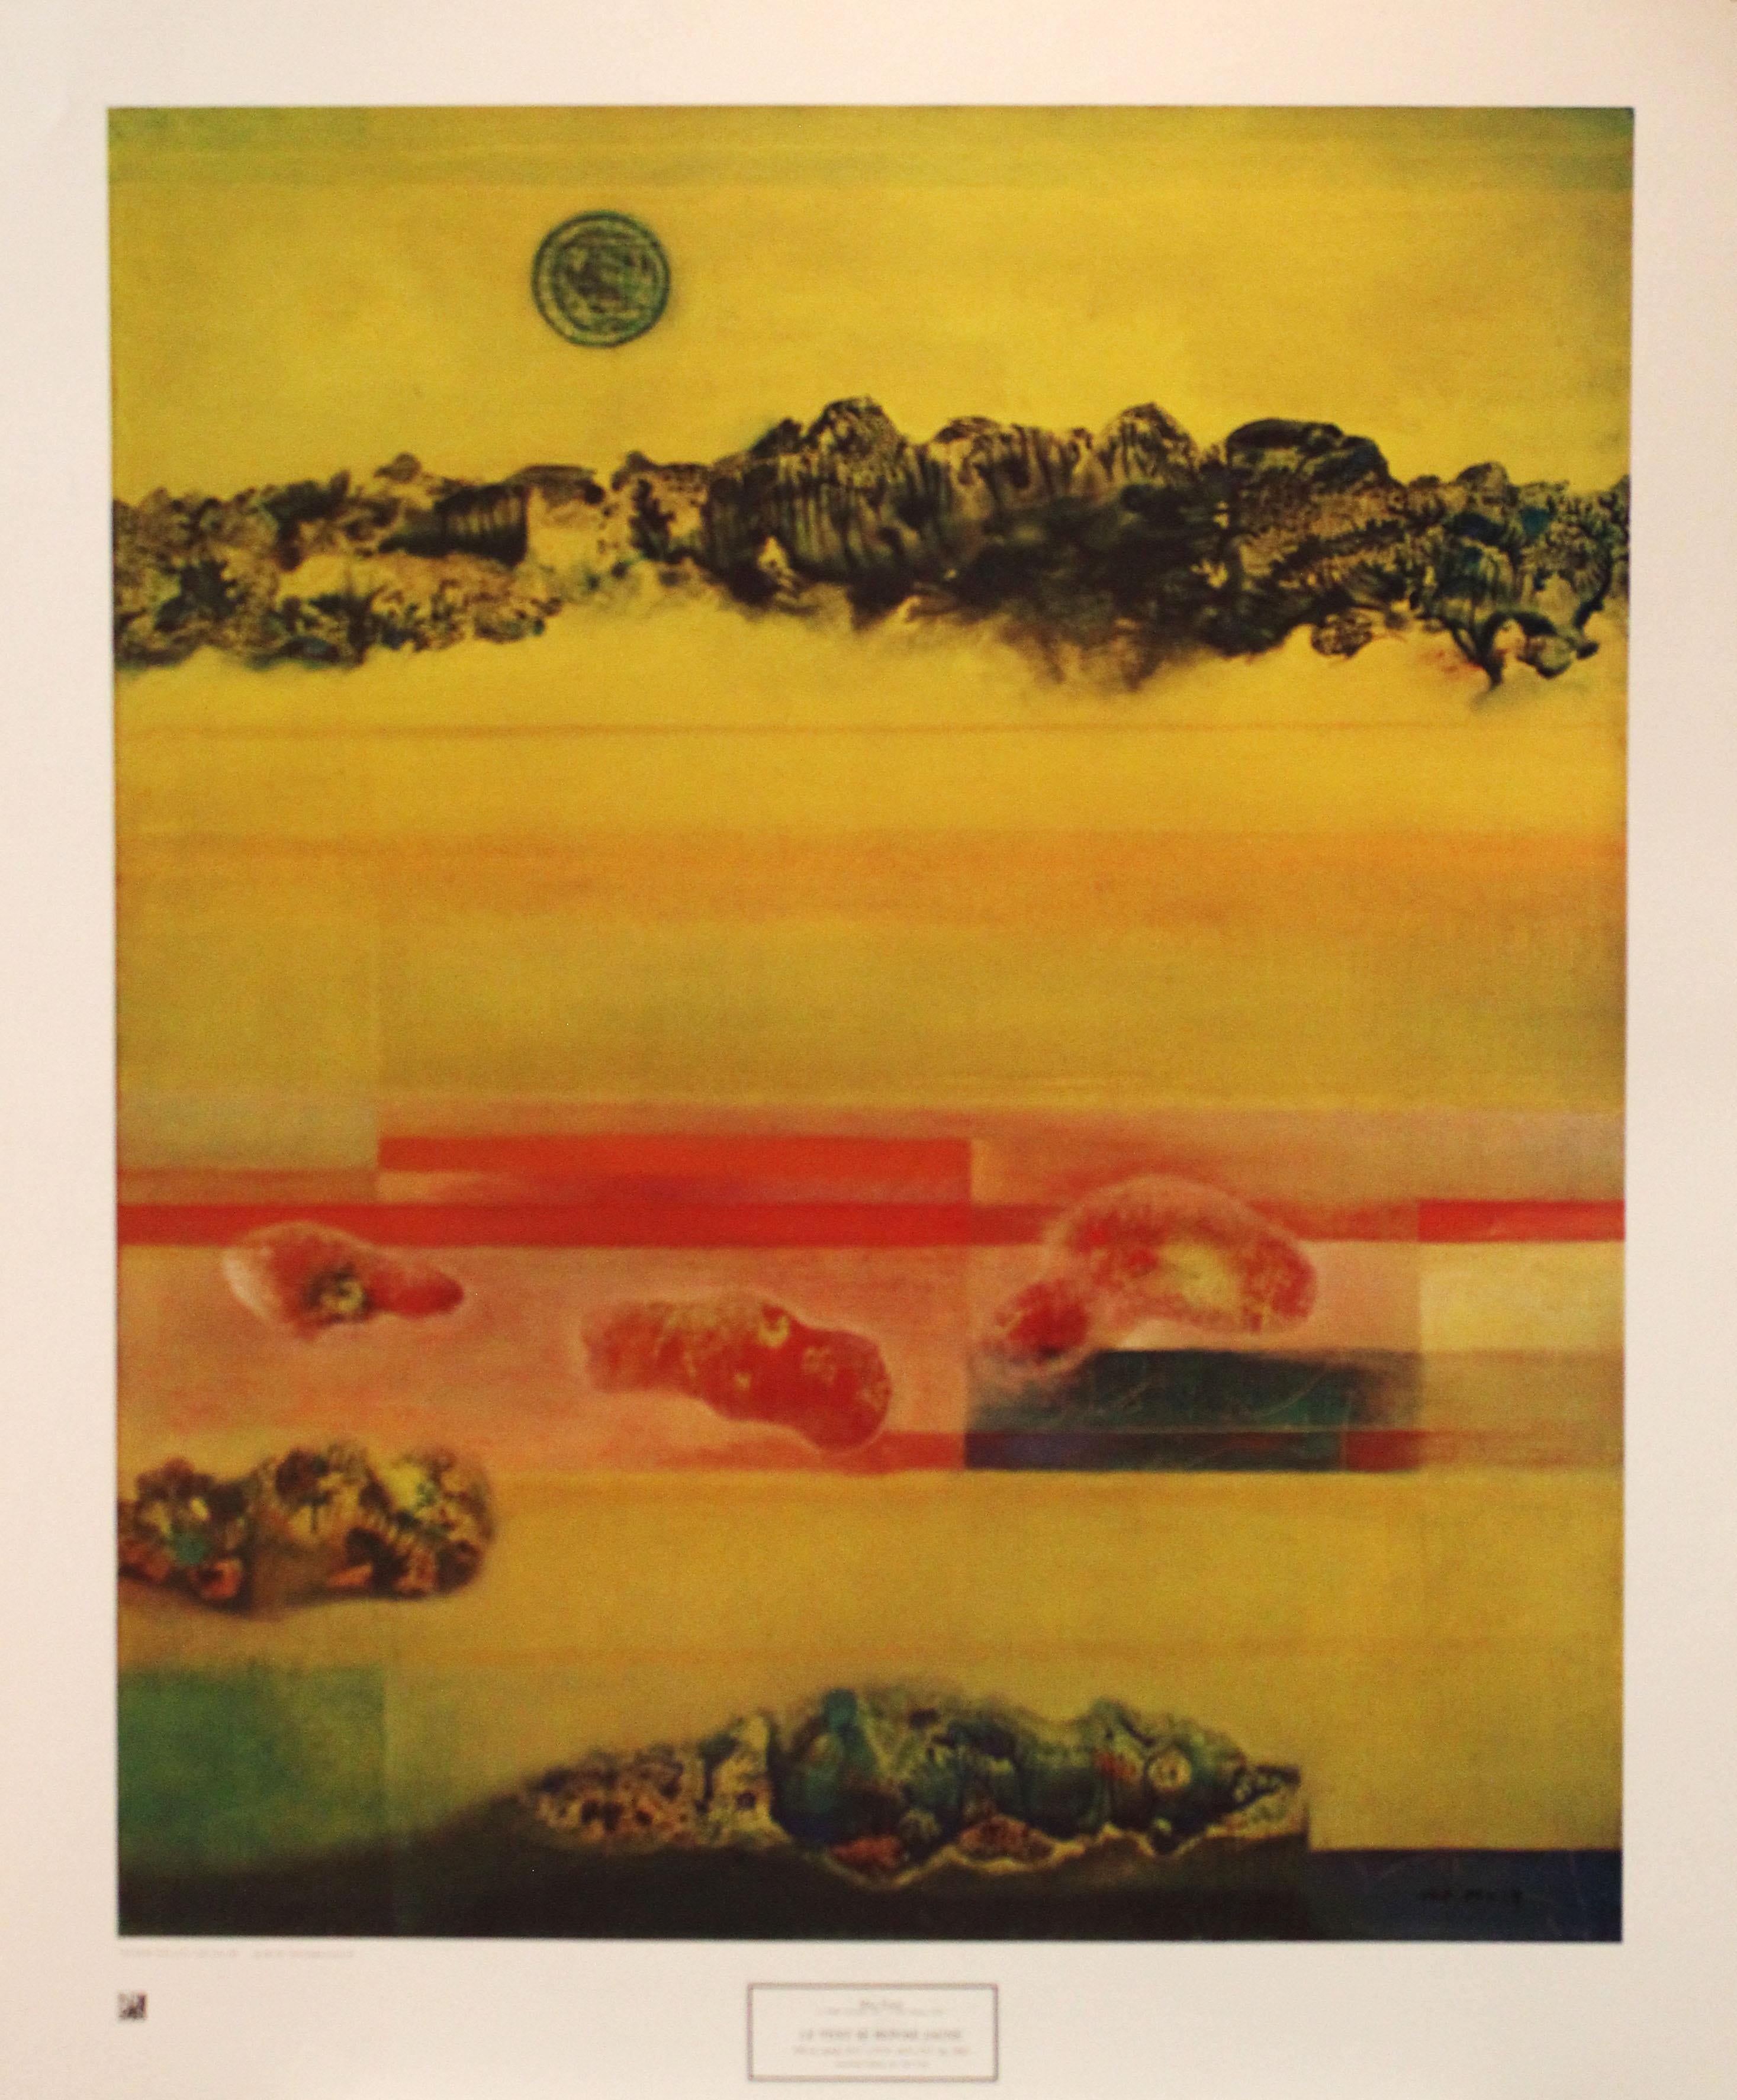 (after) Max Ernst Abstract Print - Le Vent Se Repose Jaune-Poster, New York Graphic Society. Printed in Italy